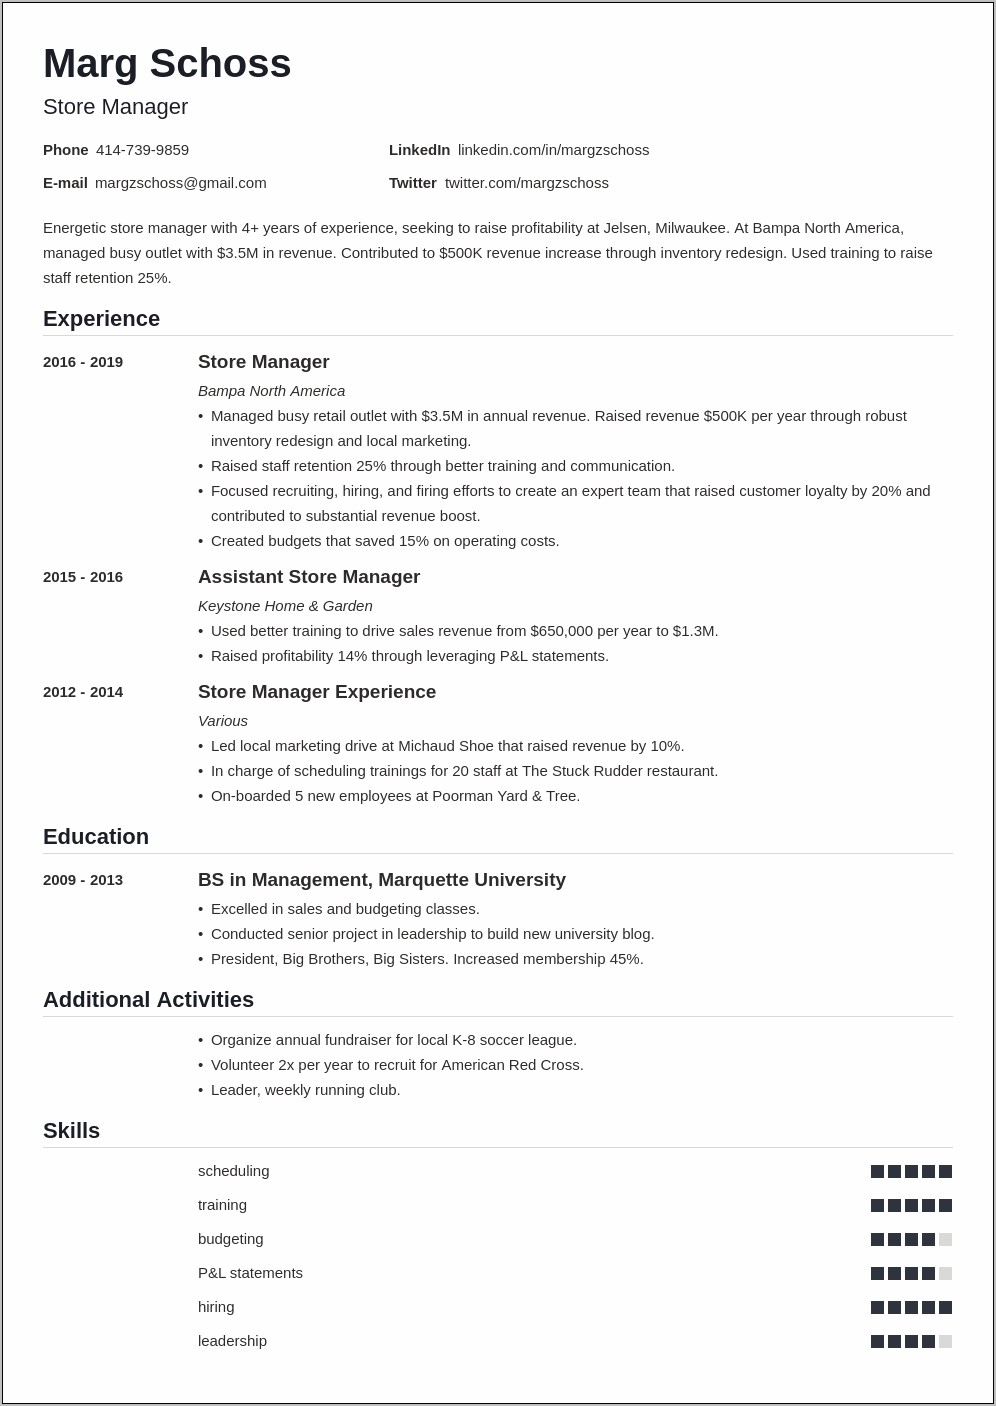 Resume For Department Manager In Retail